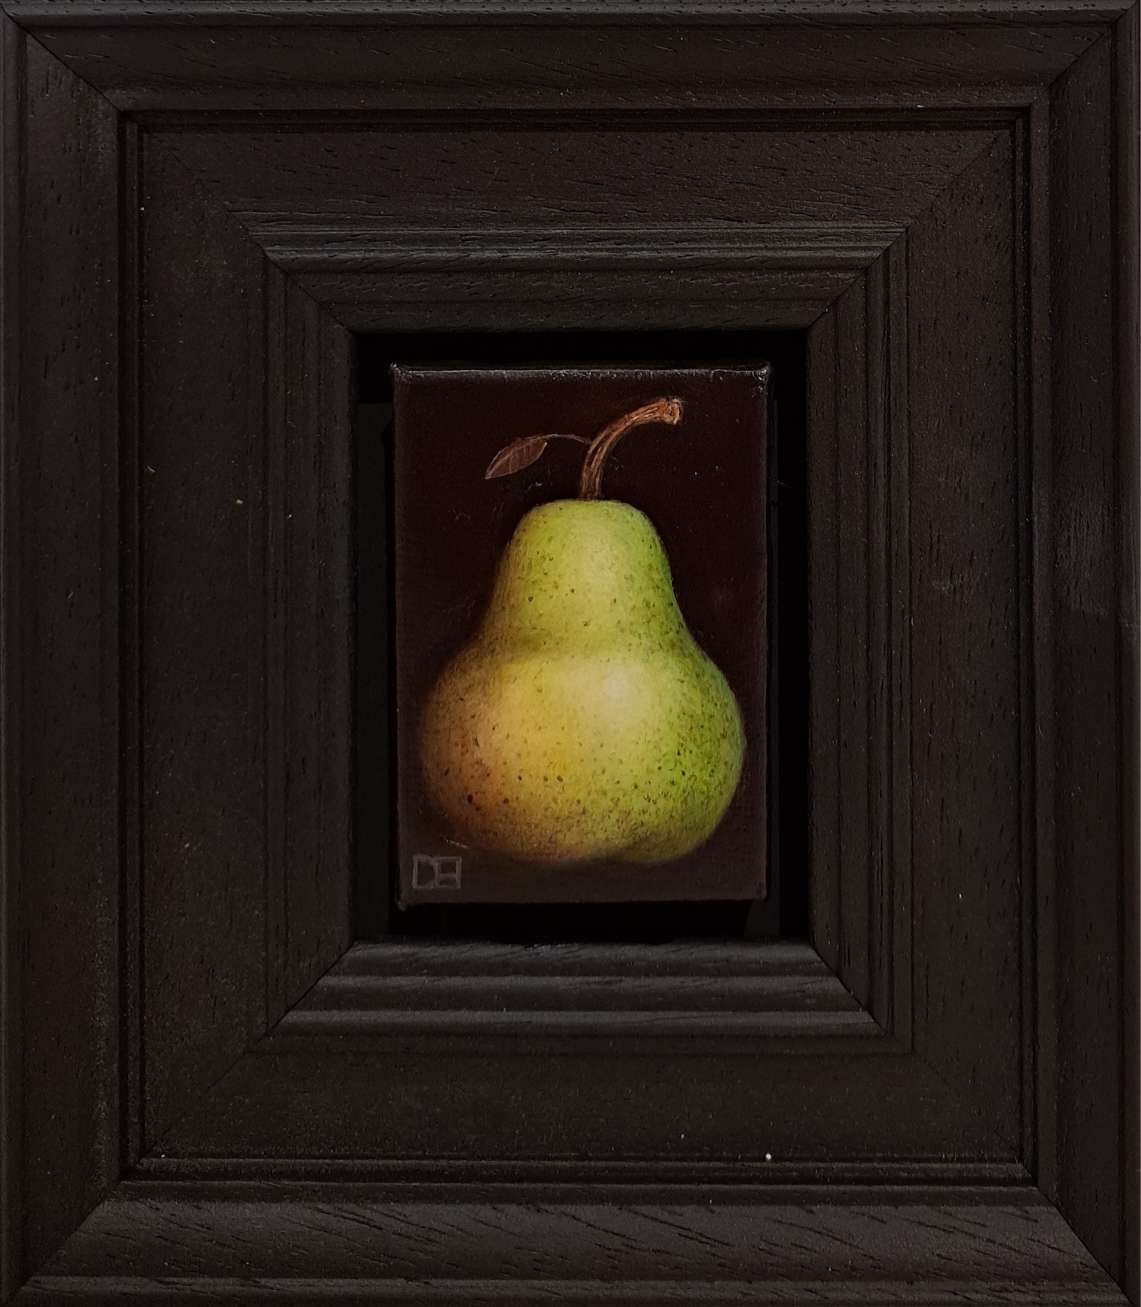 Pocket Green Speckled Pear by Dani Humberstone